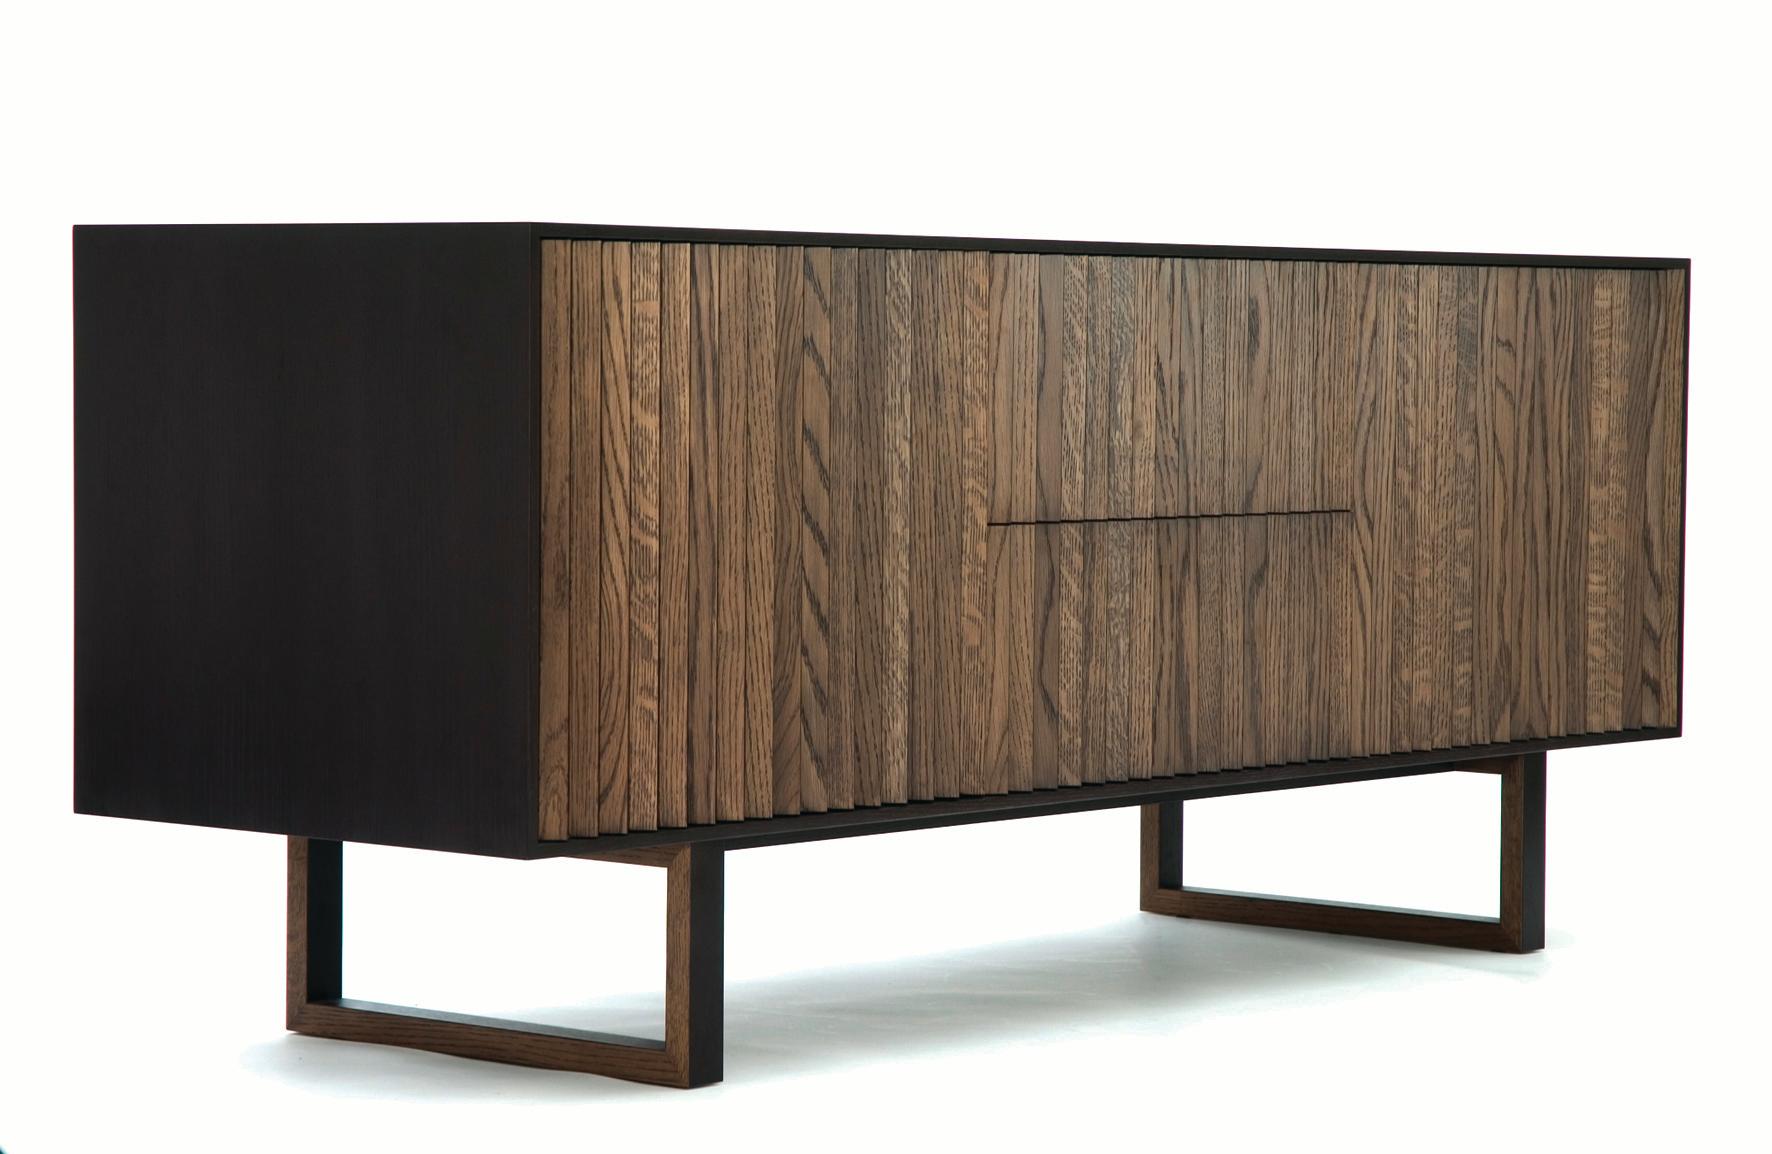 The clair sideboard features multifaceted front panels, stained in two tones creating an unusual effect, as the sideboard appears to change color on perspective. It is lovingly handmade to order by a single artisan with great attention to detail: